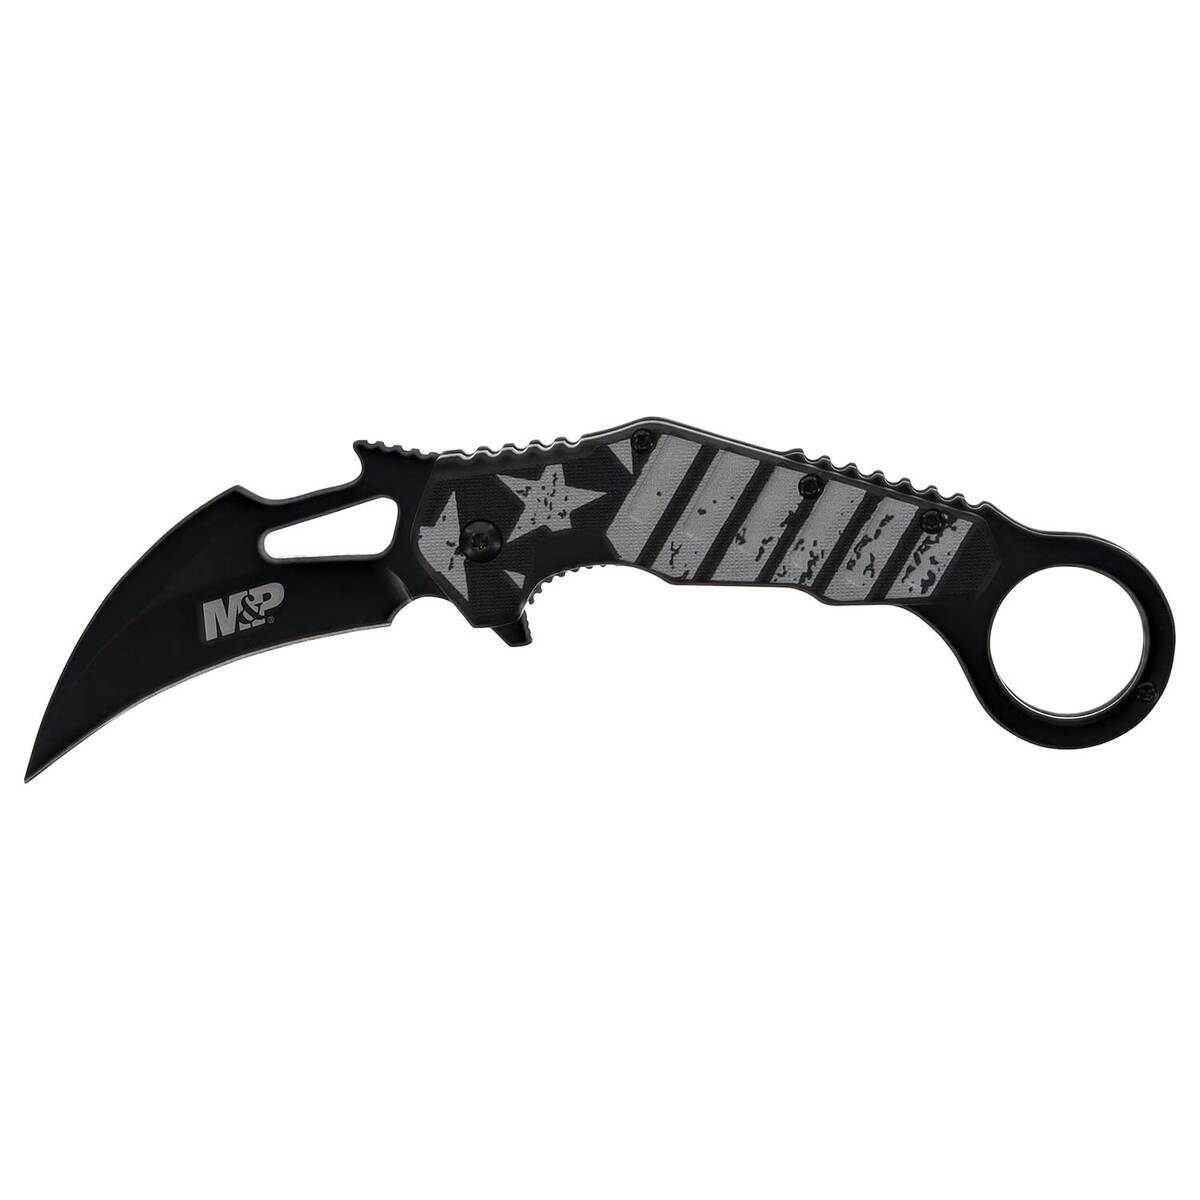 Smith's Consumer Products Store. 4 INCH FOLDING KNIFE